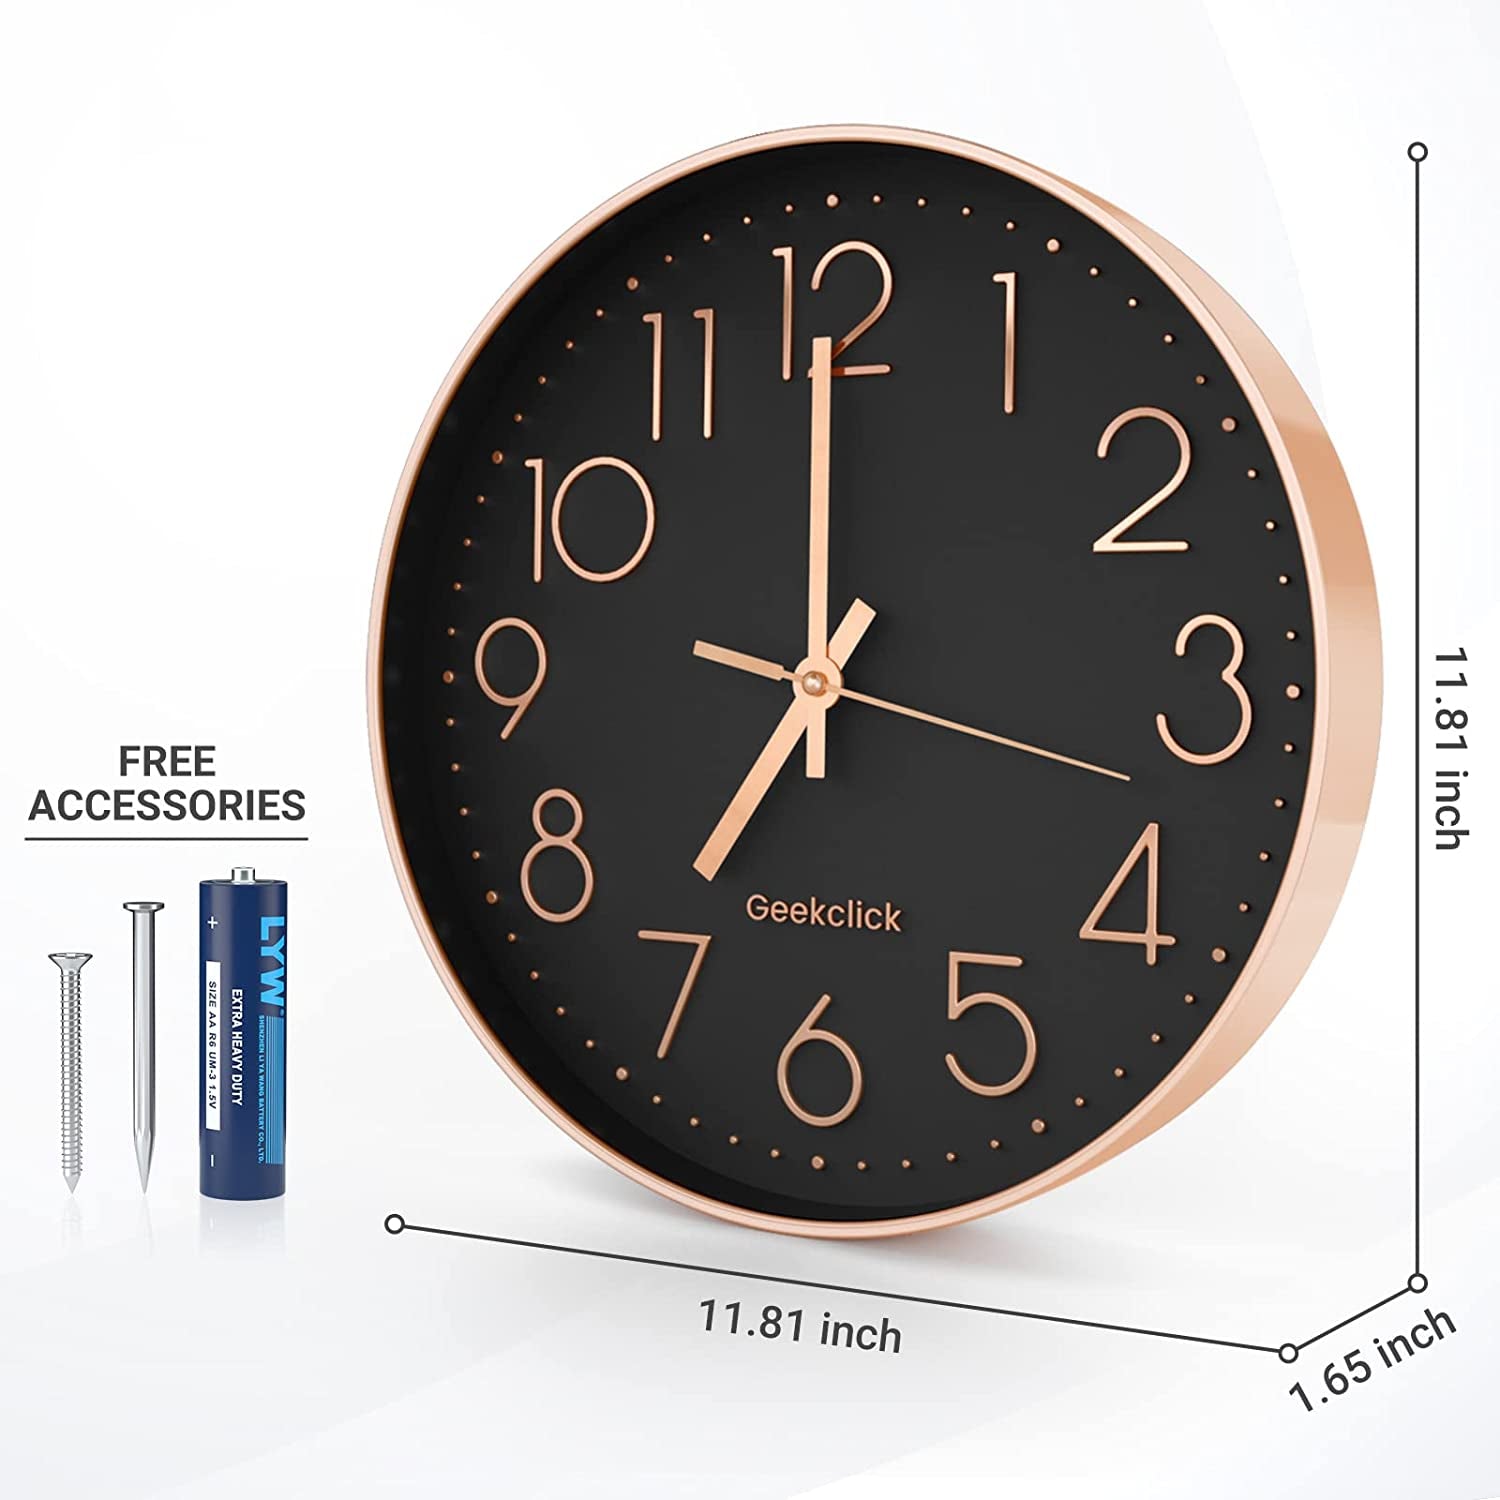 12" Silent Wall Clock - K&L Trending Products